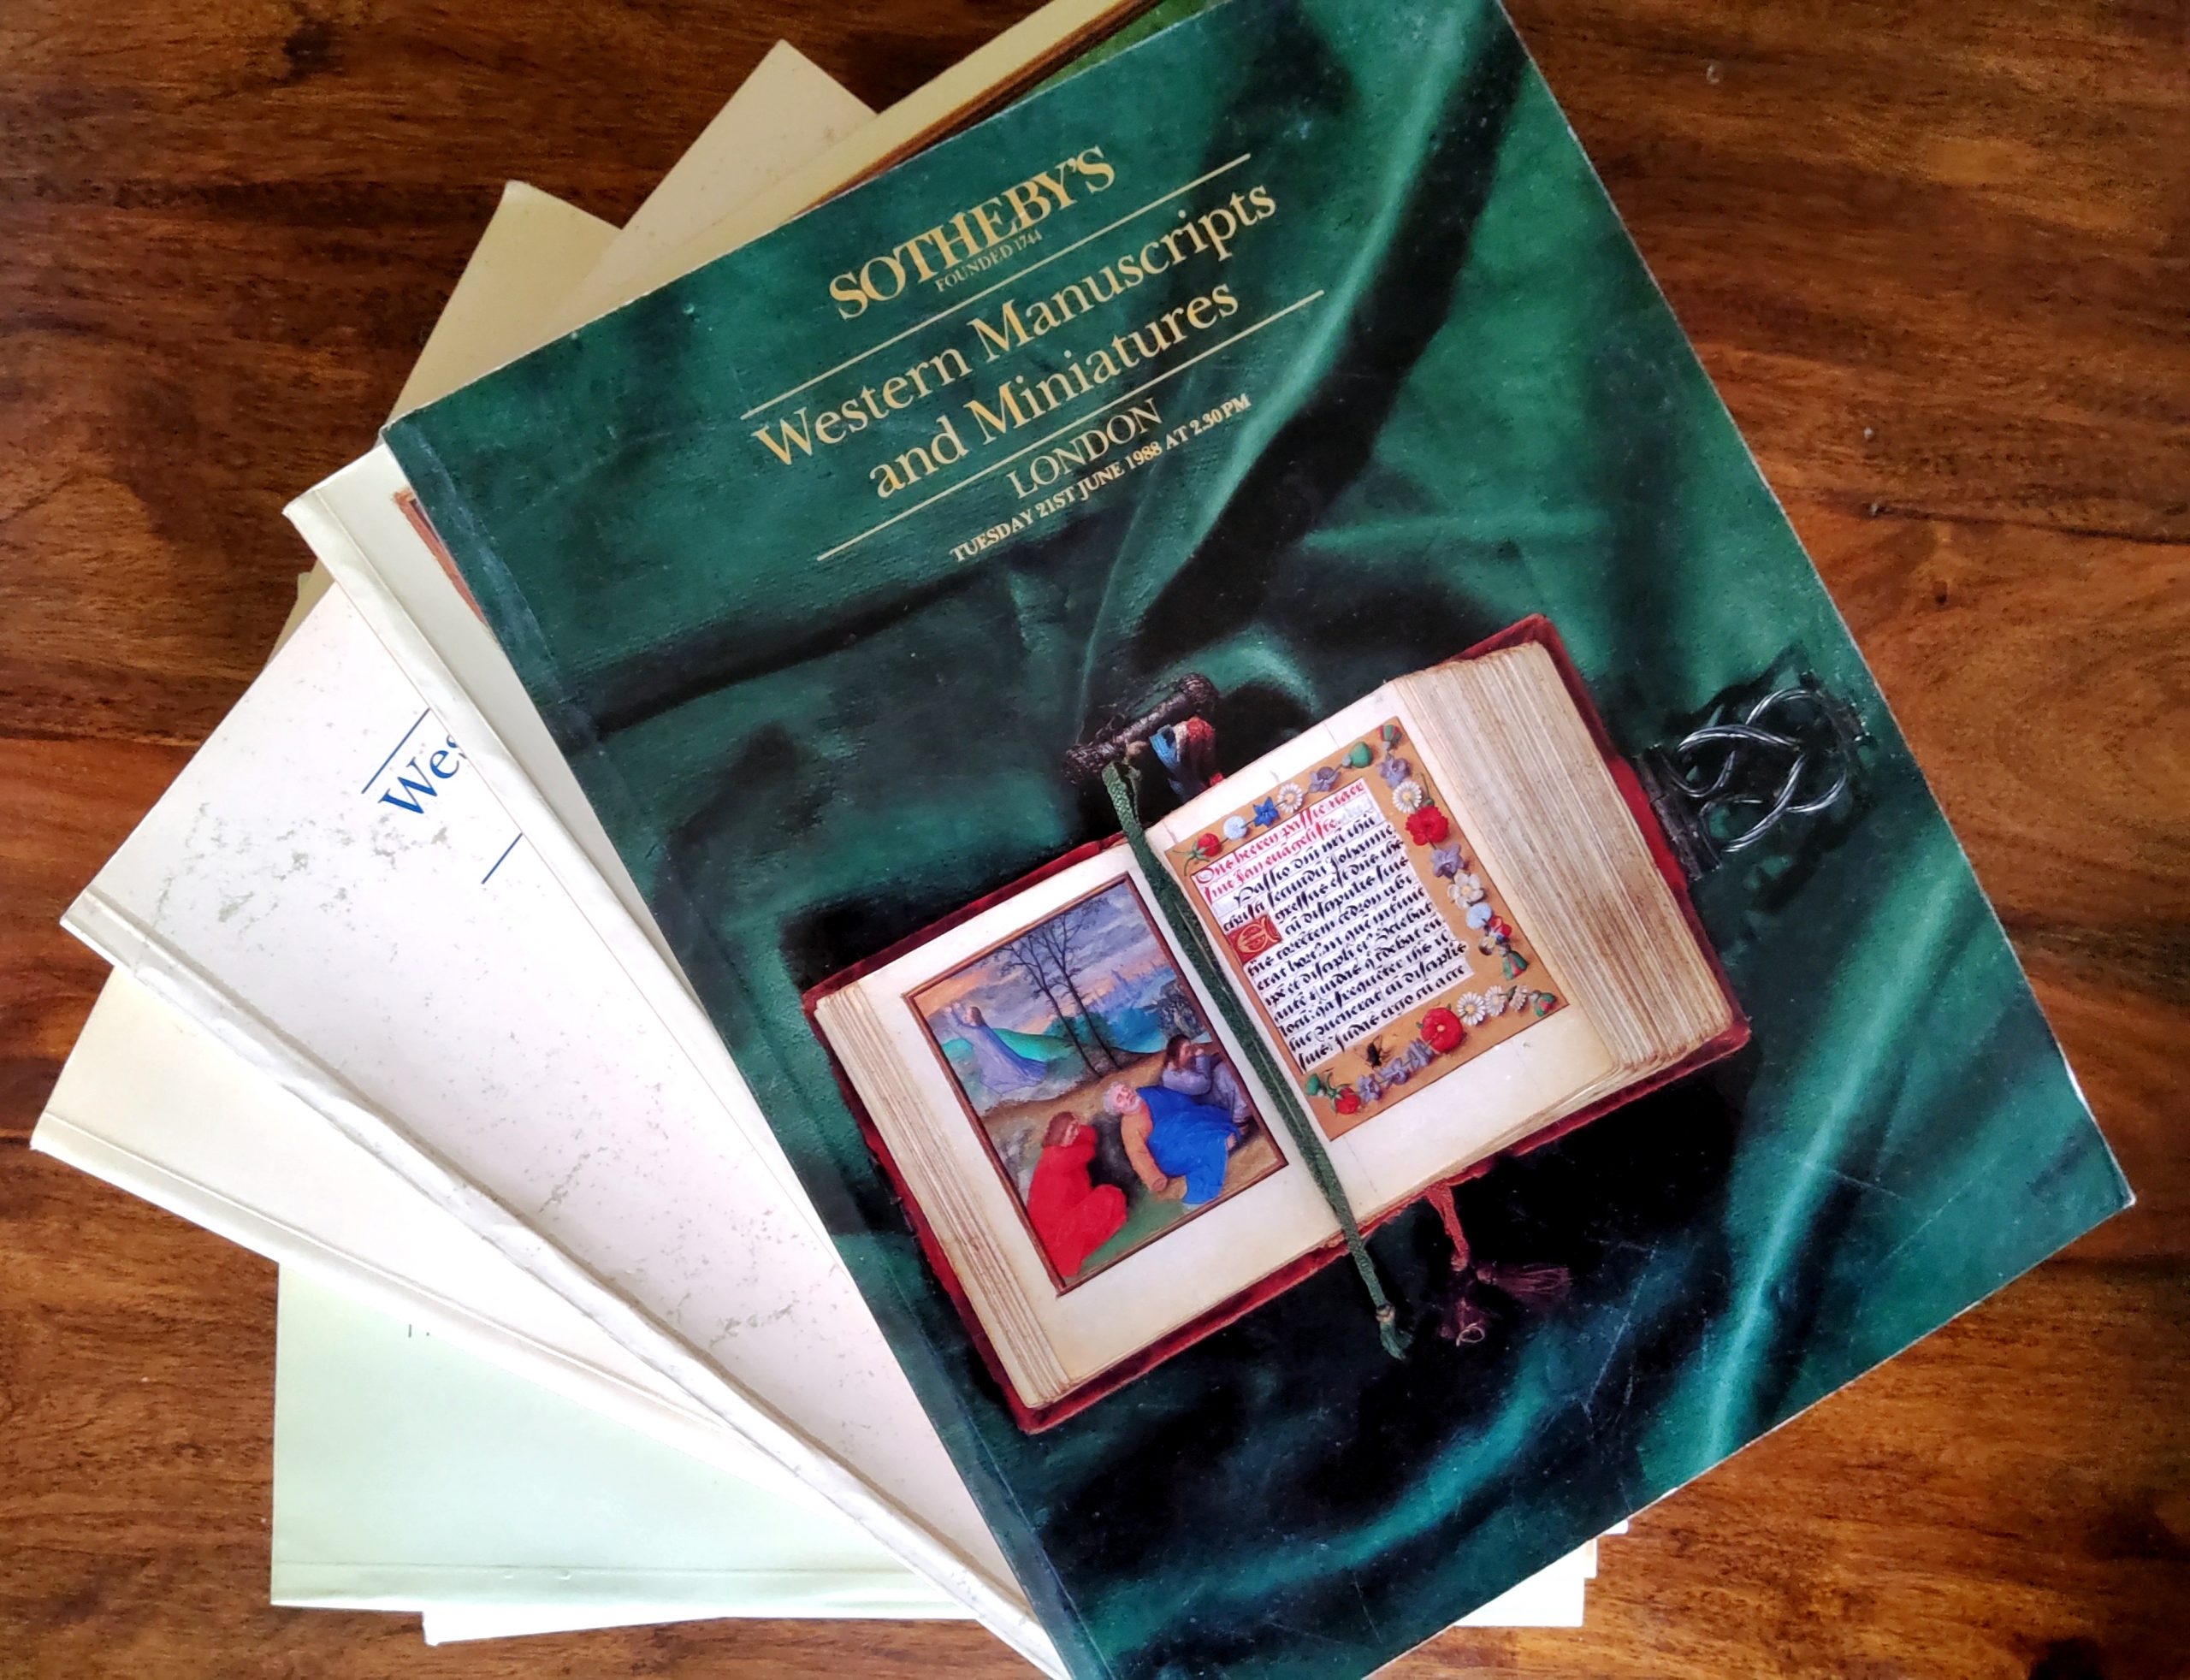 Sotheby’s Catalogues of Western Manuscripts and Miniatures. 12 volumes. 1984-1989